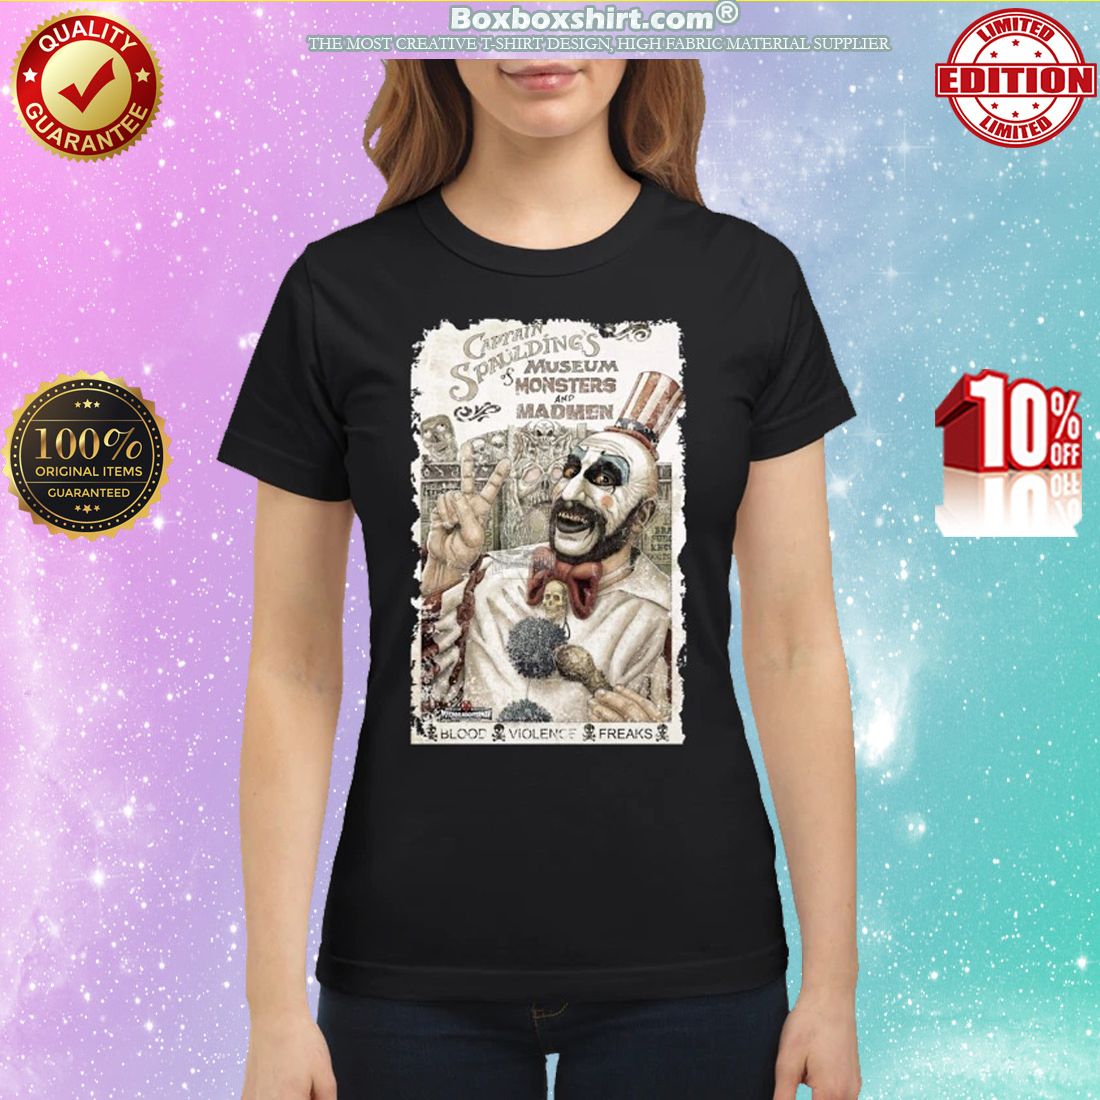 Captain Spaulding museum of monsters and madmen classic shirt